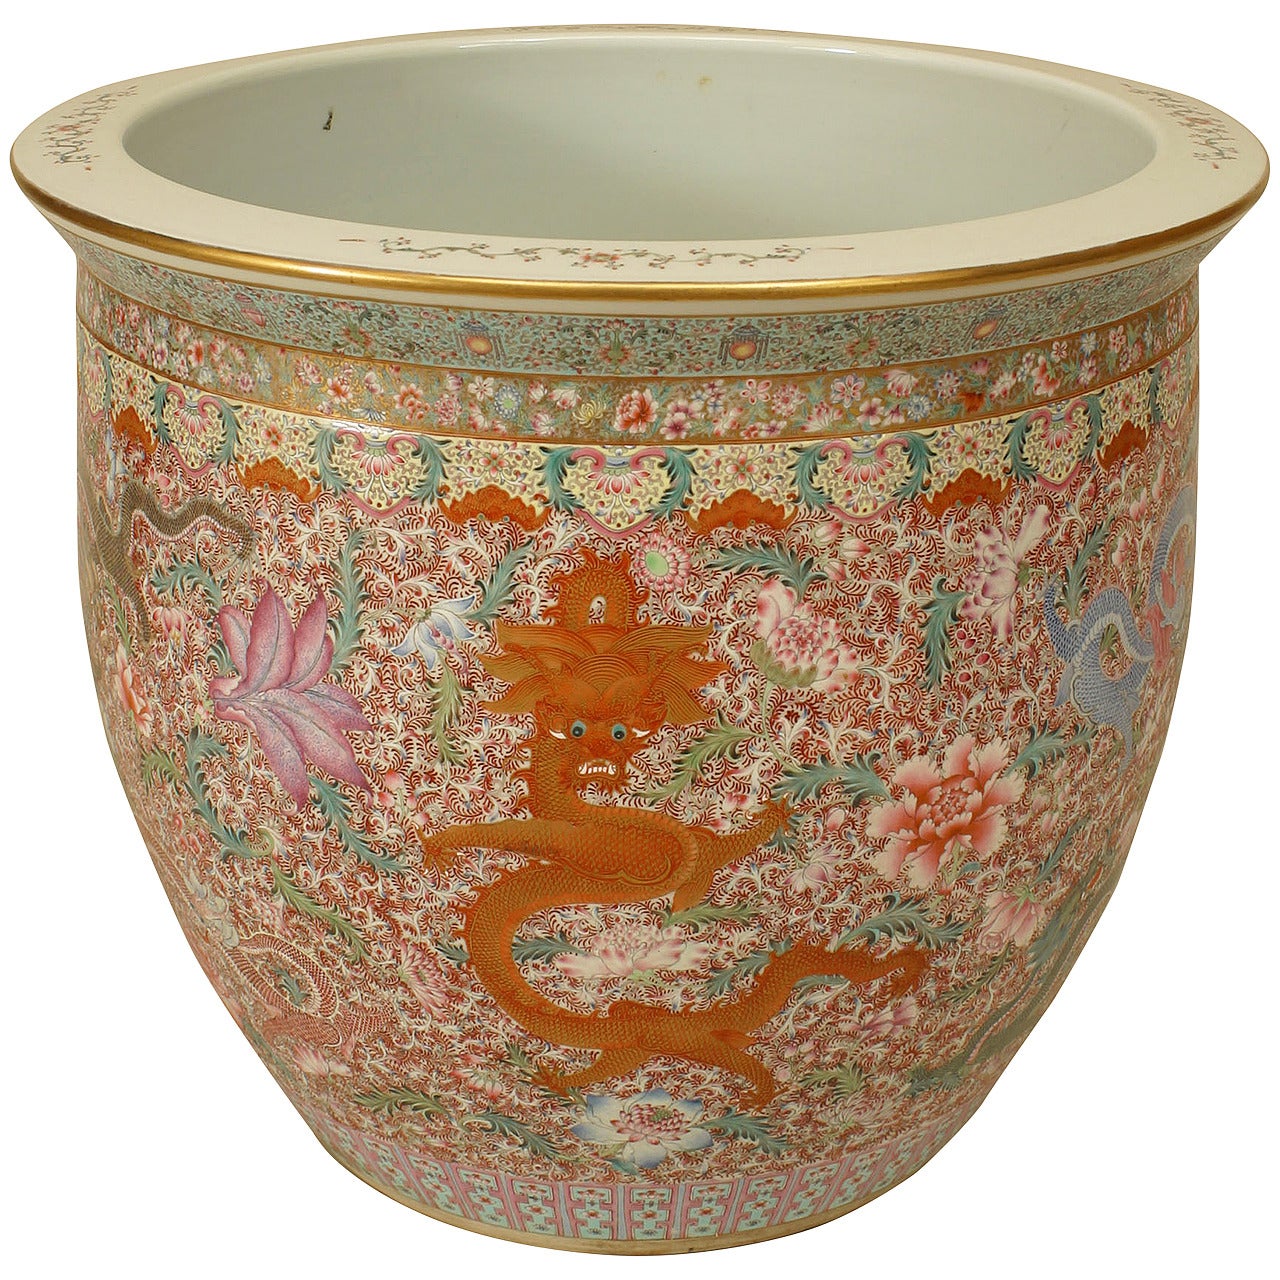 Asian Porcelain Jardiniere with Floral and Dragon Designs